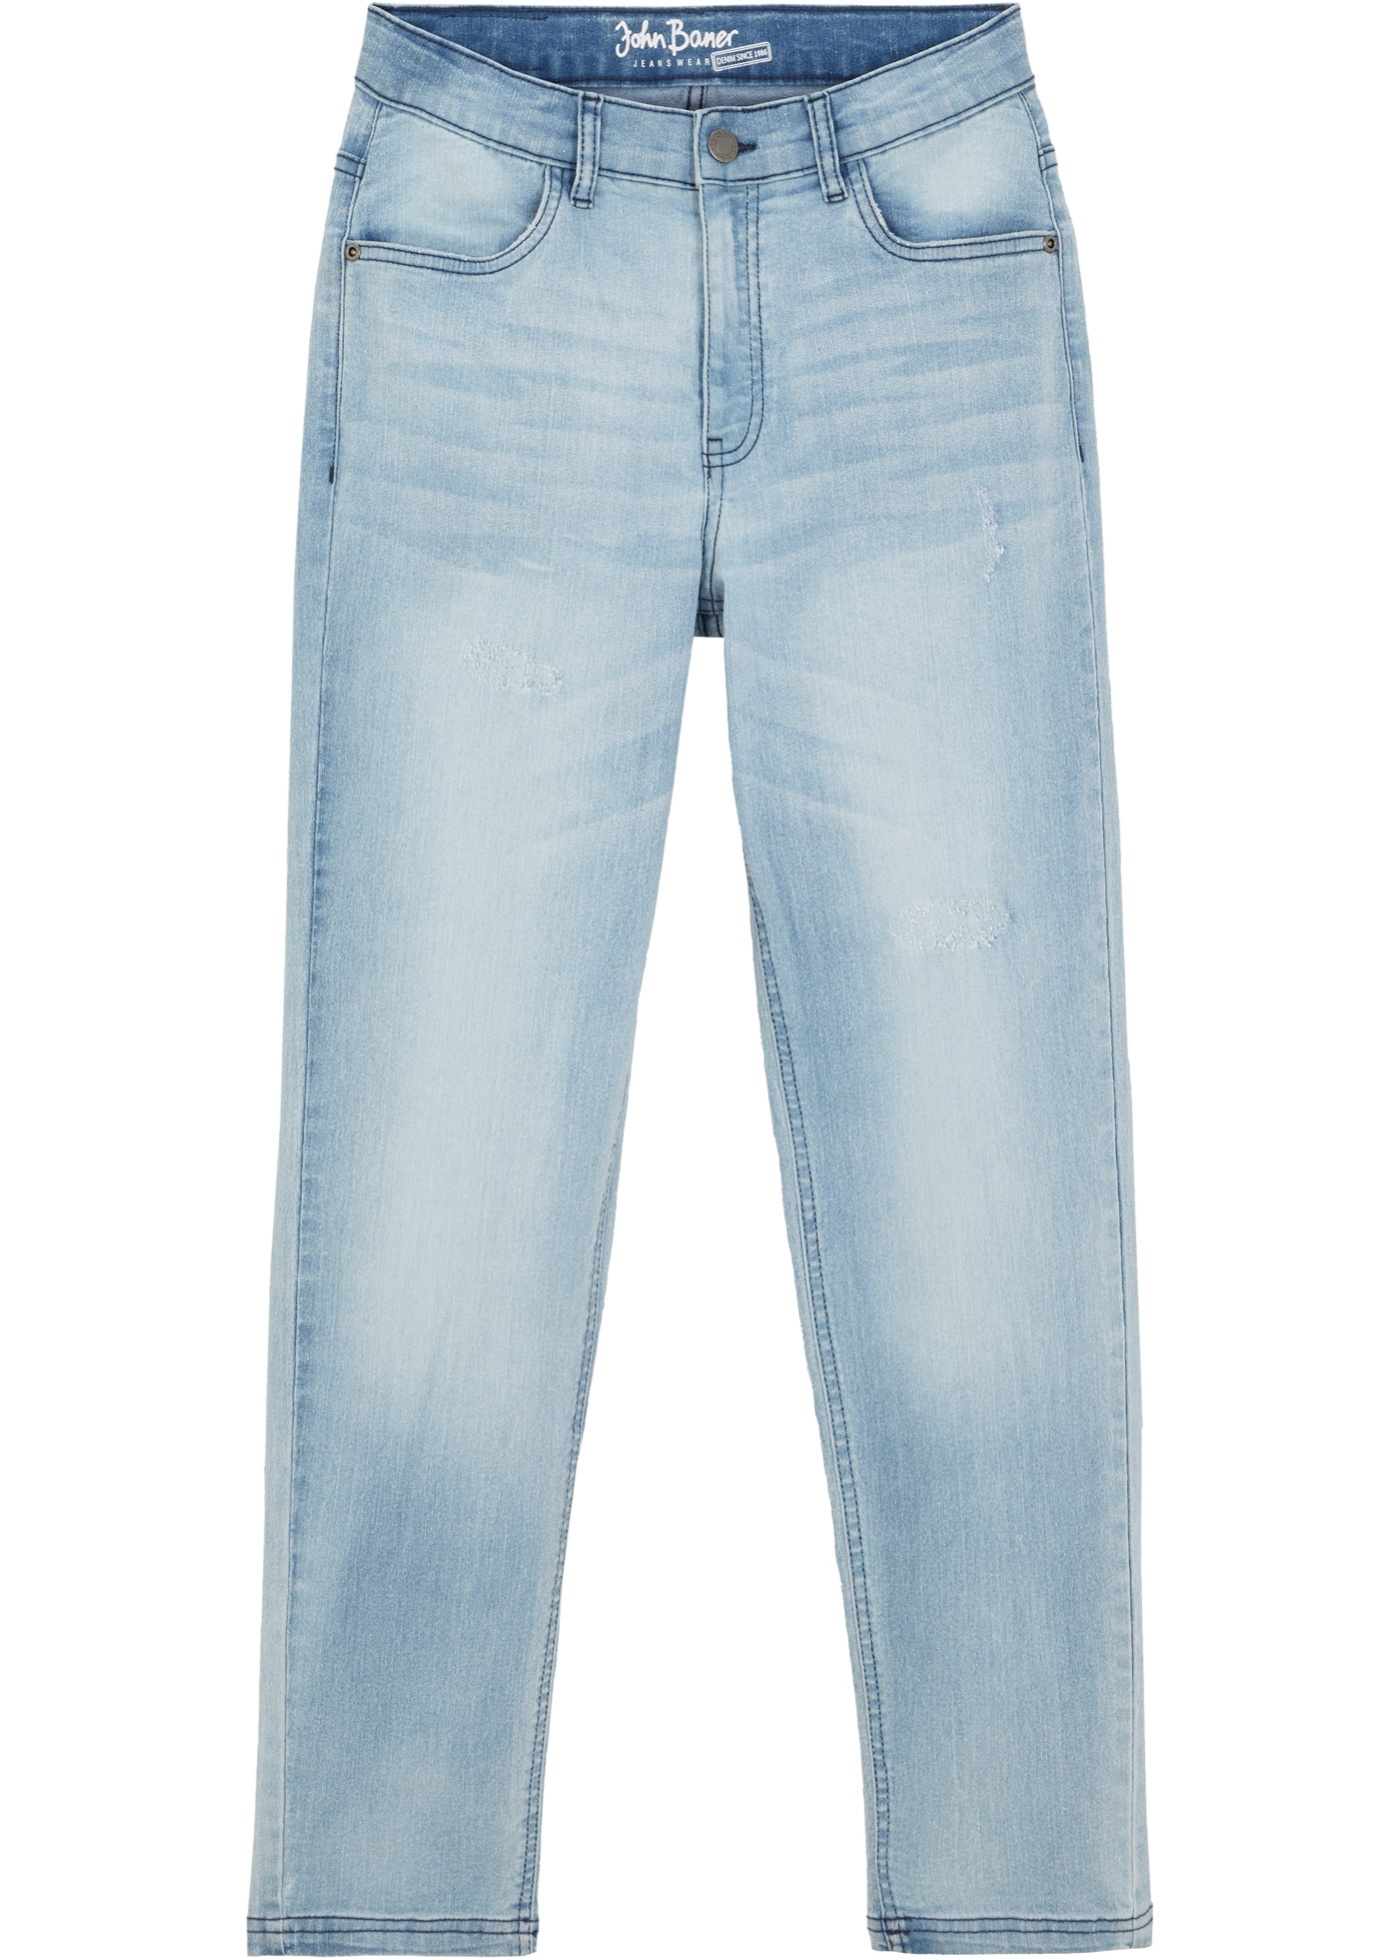 Jongens jeans, tapered fit